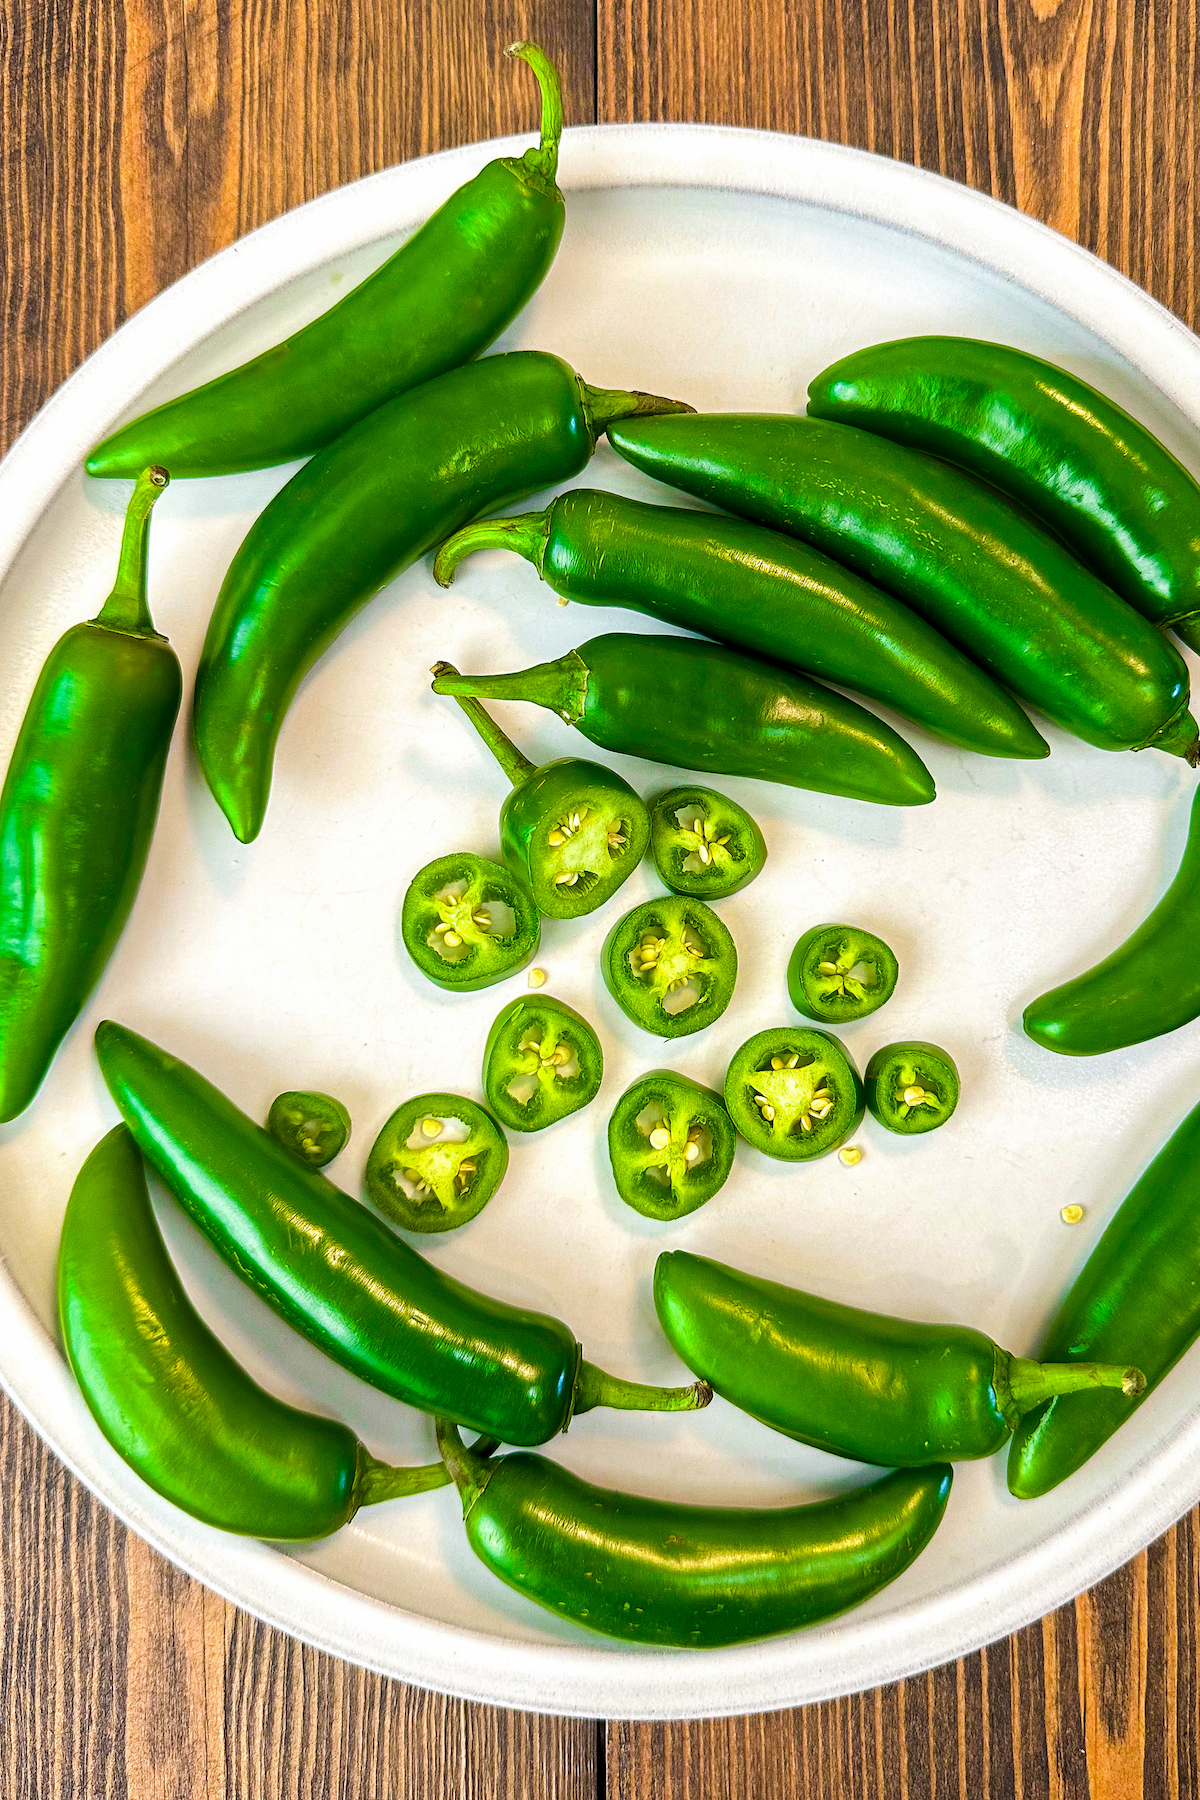 Serrano peppers on a plate sliced into pieces.